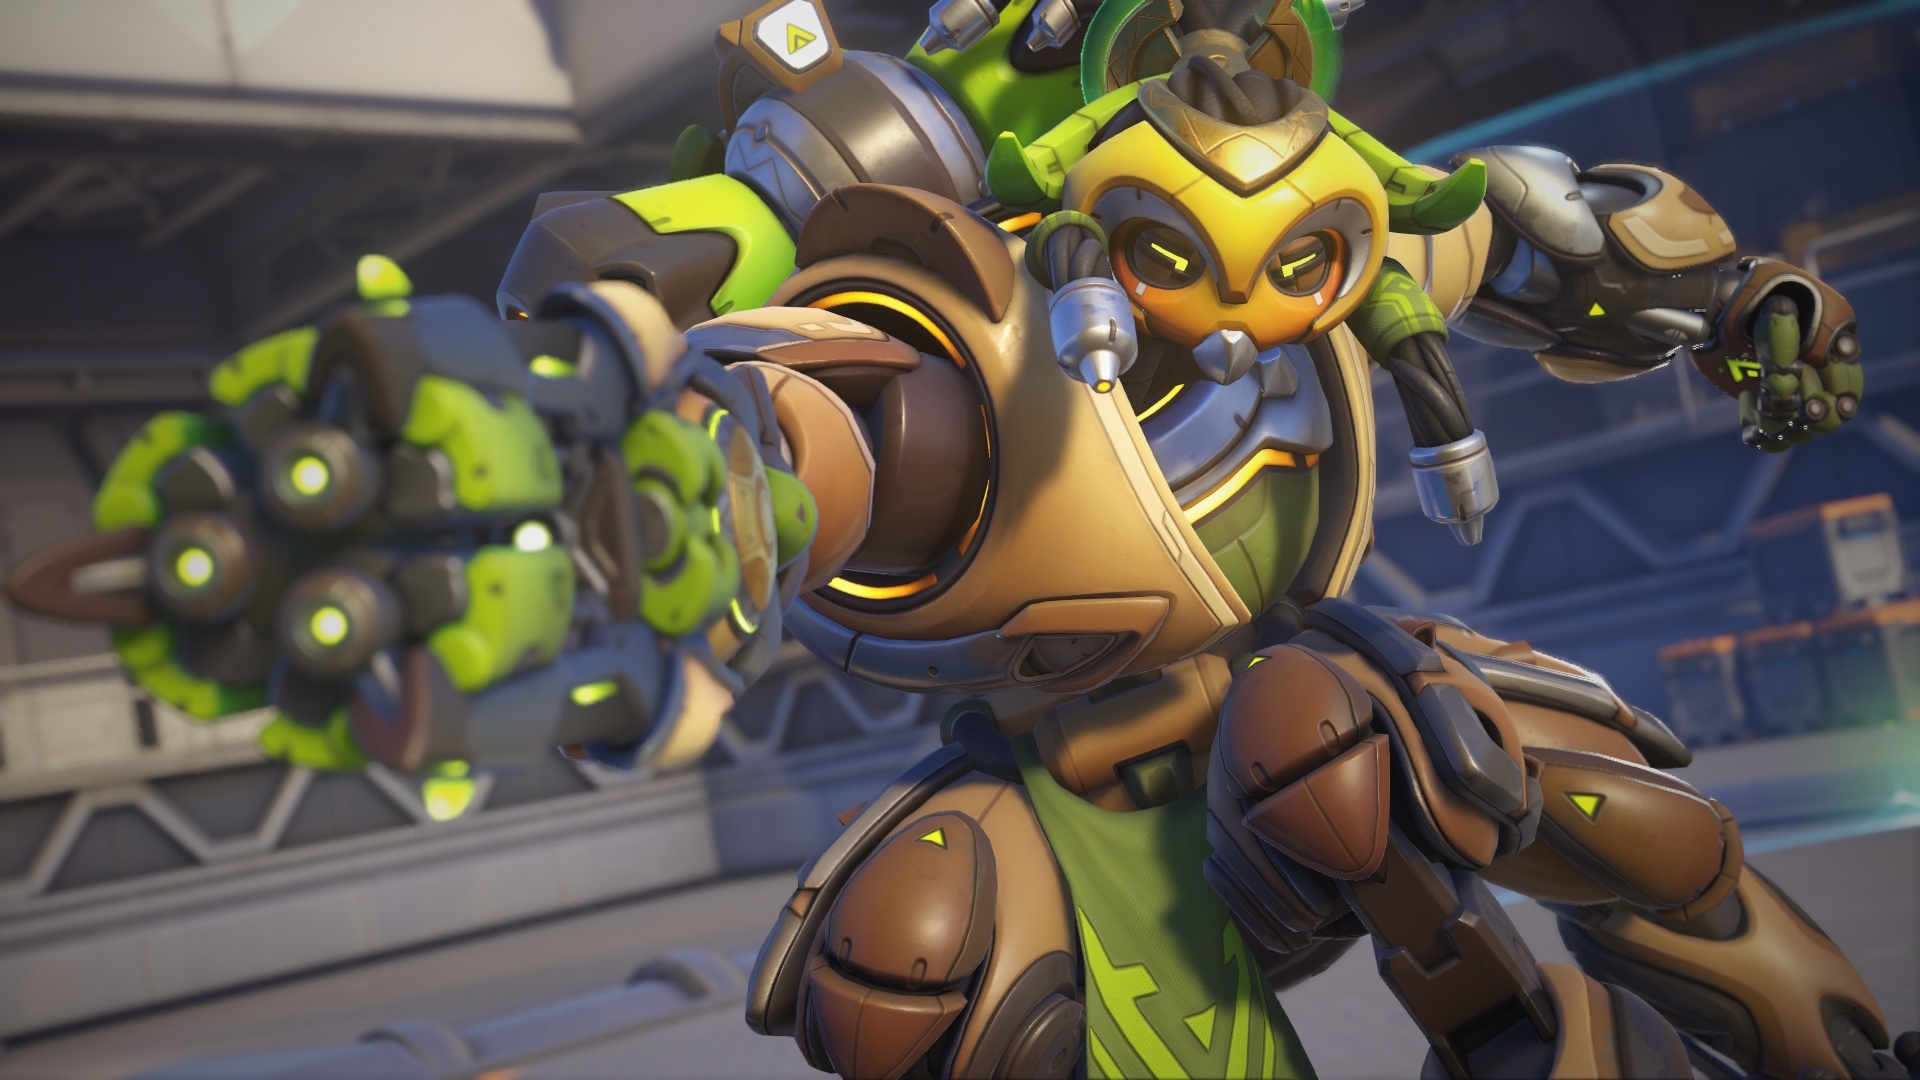 The 5 best custom game codes in Overwatch 2 - Dot Esports